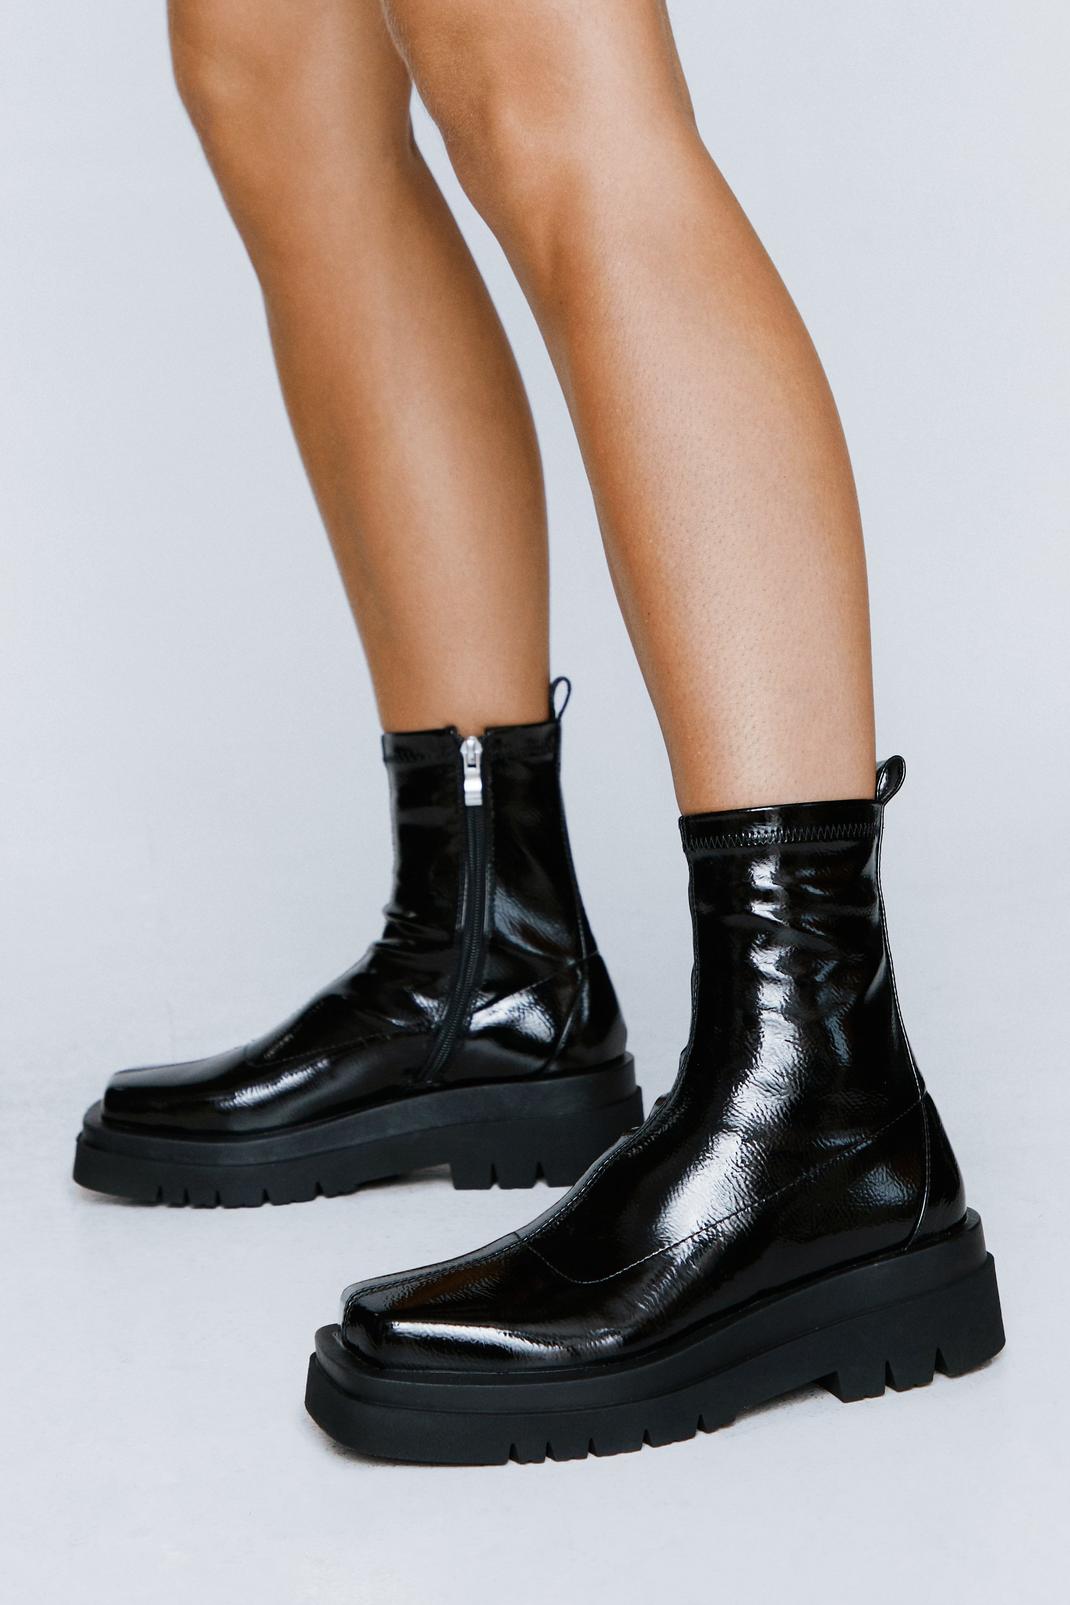 Black Patent Square Toe Ankle Sock Boots image number 1